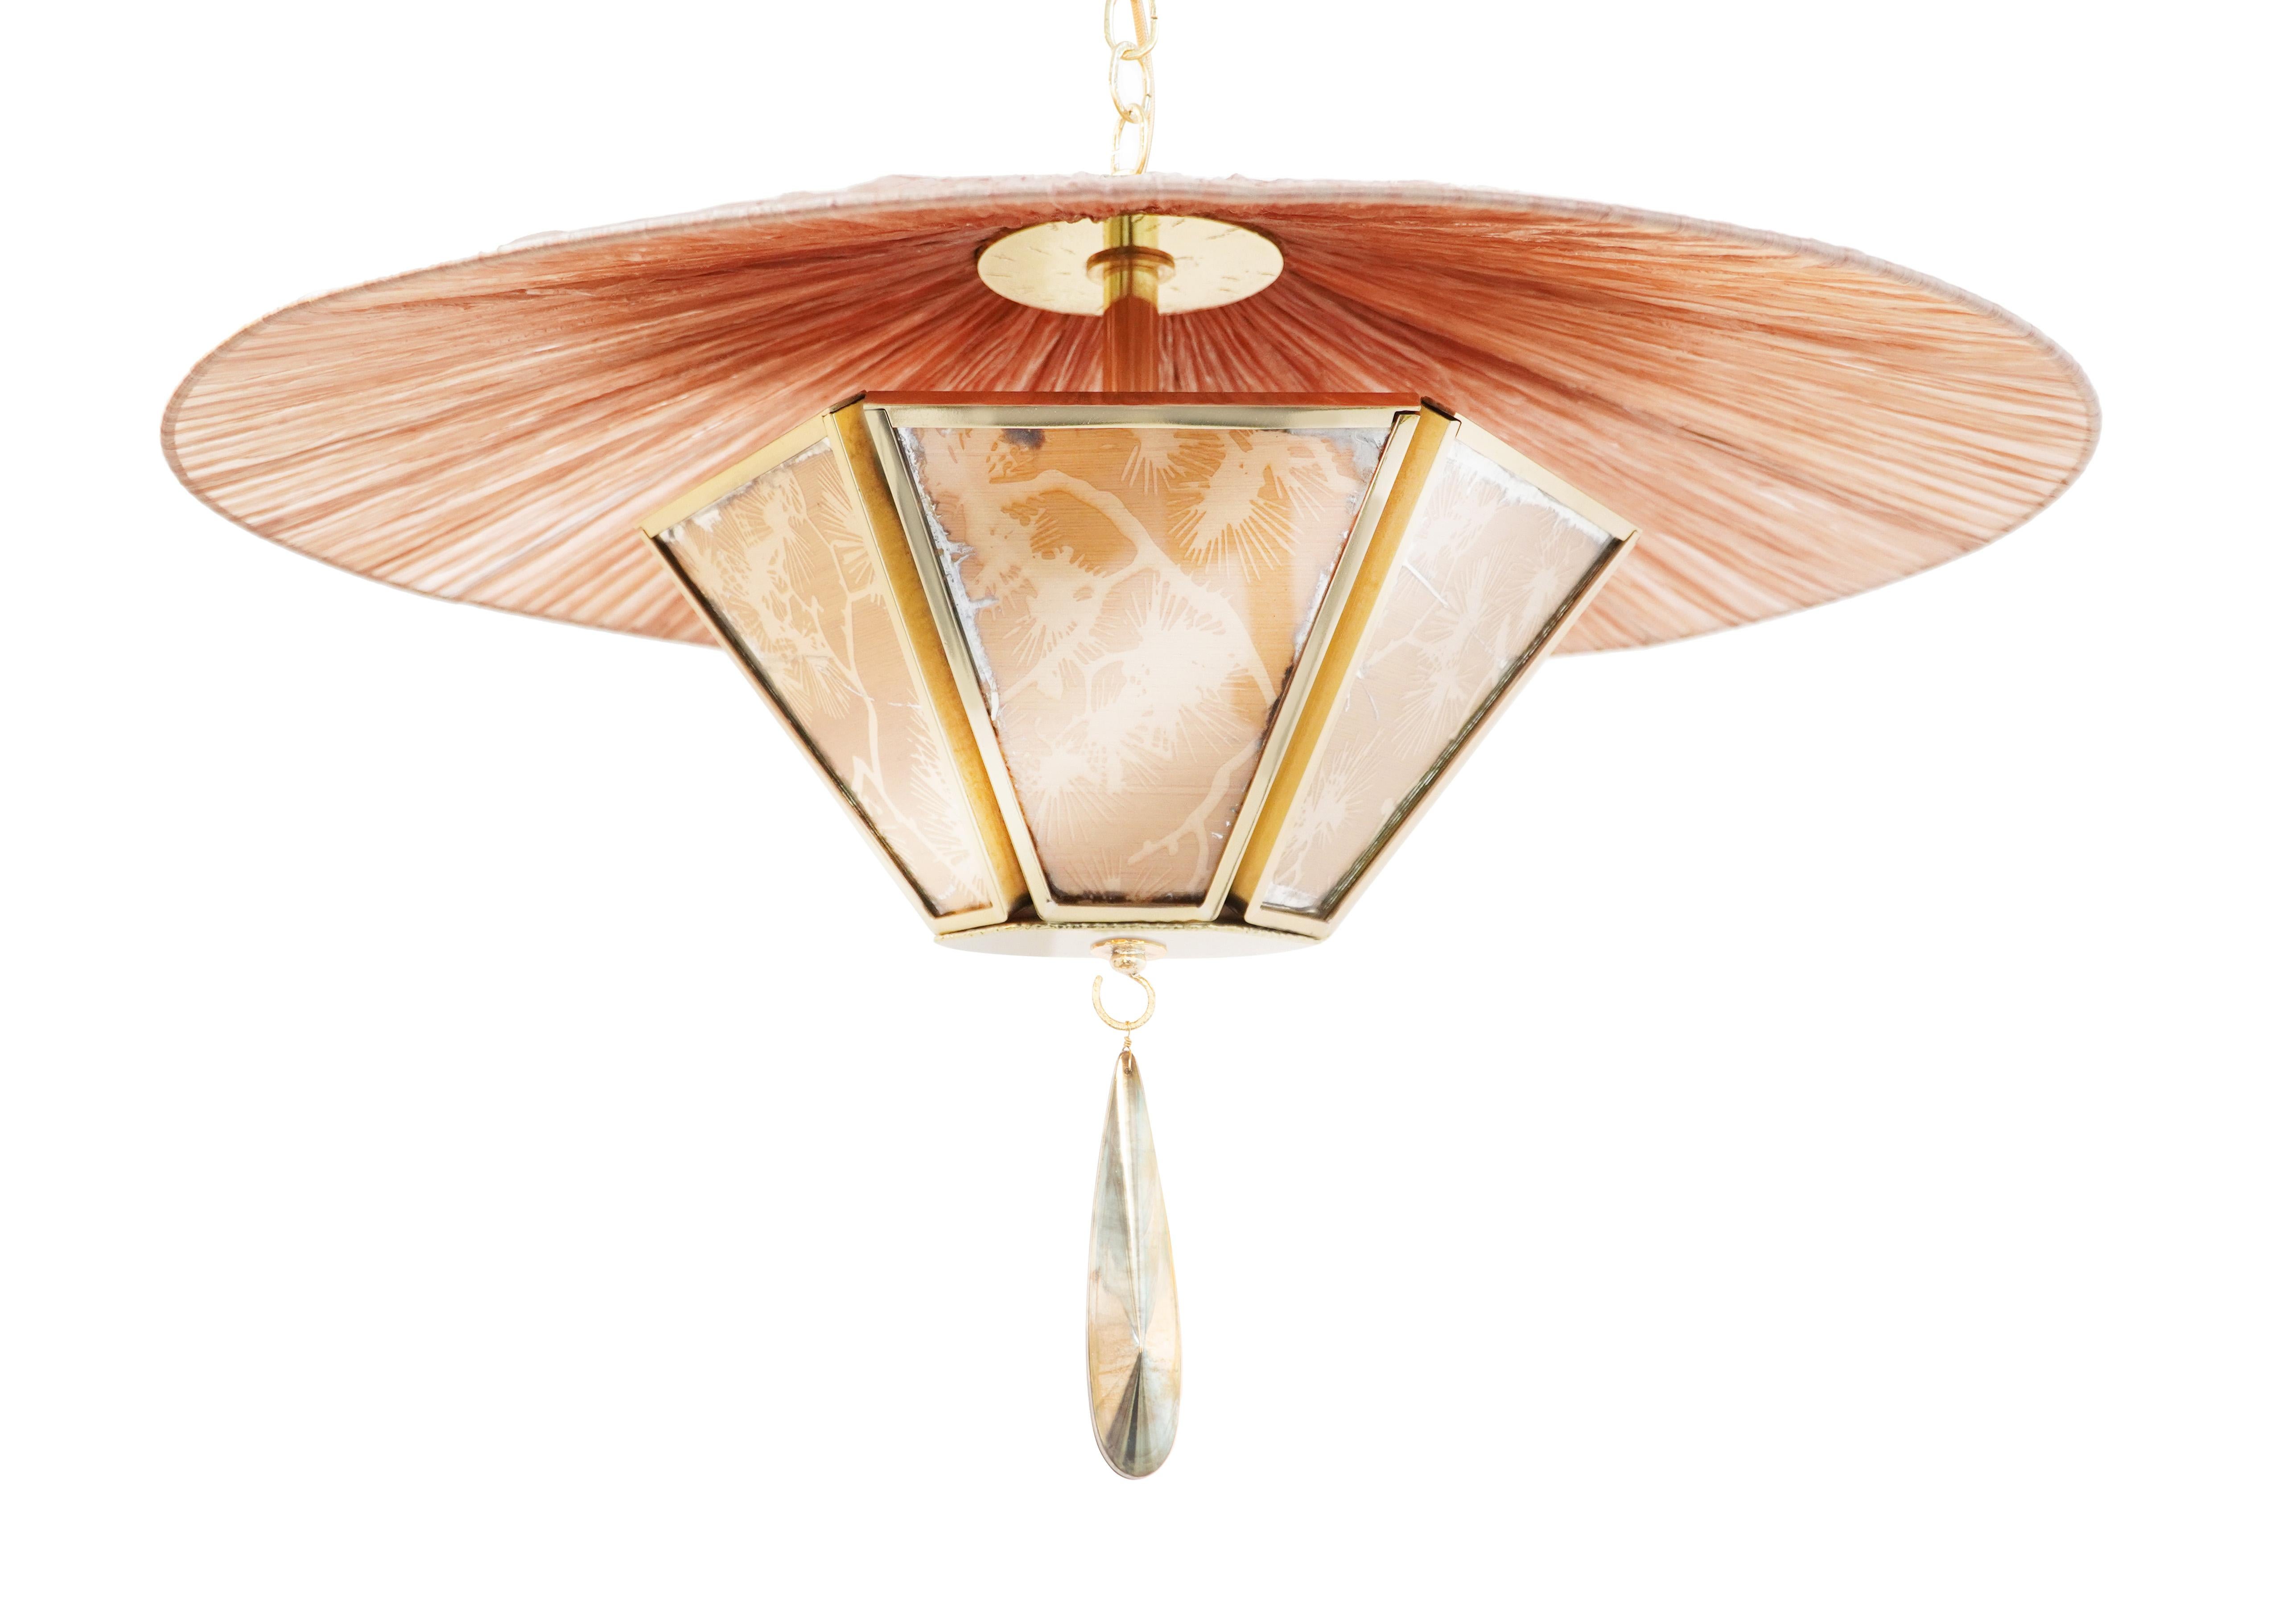 Japanned “Sunshine” Contemporary Hanging Lamp 70cm  Champagne Silk lampshade,  Brass